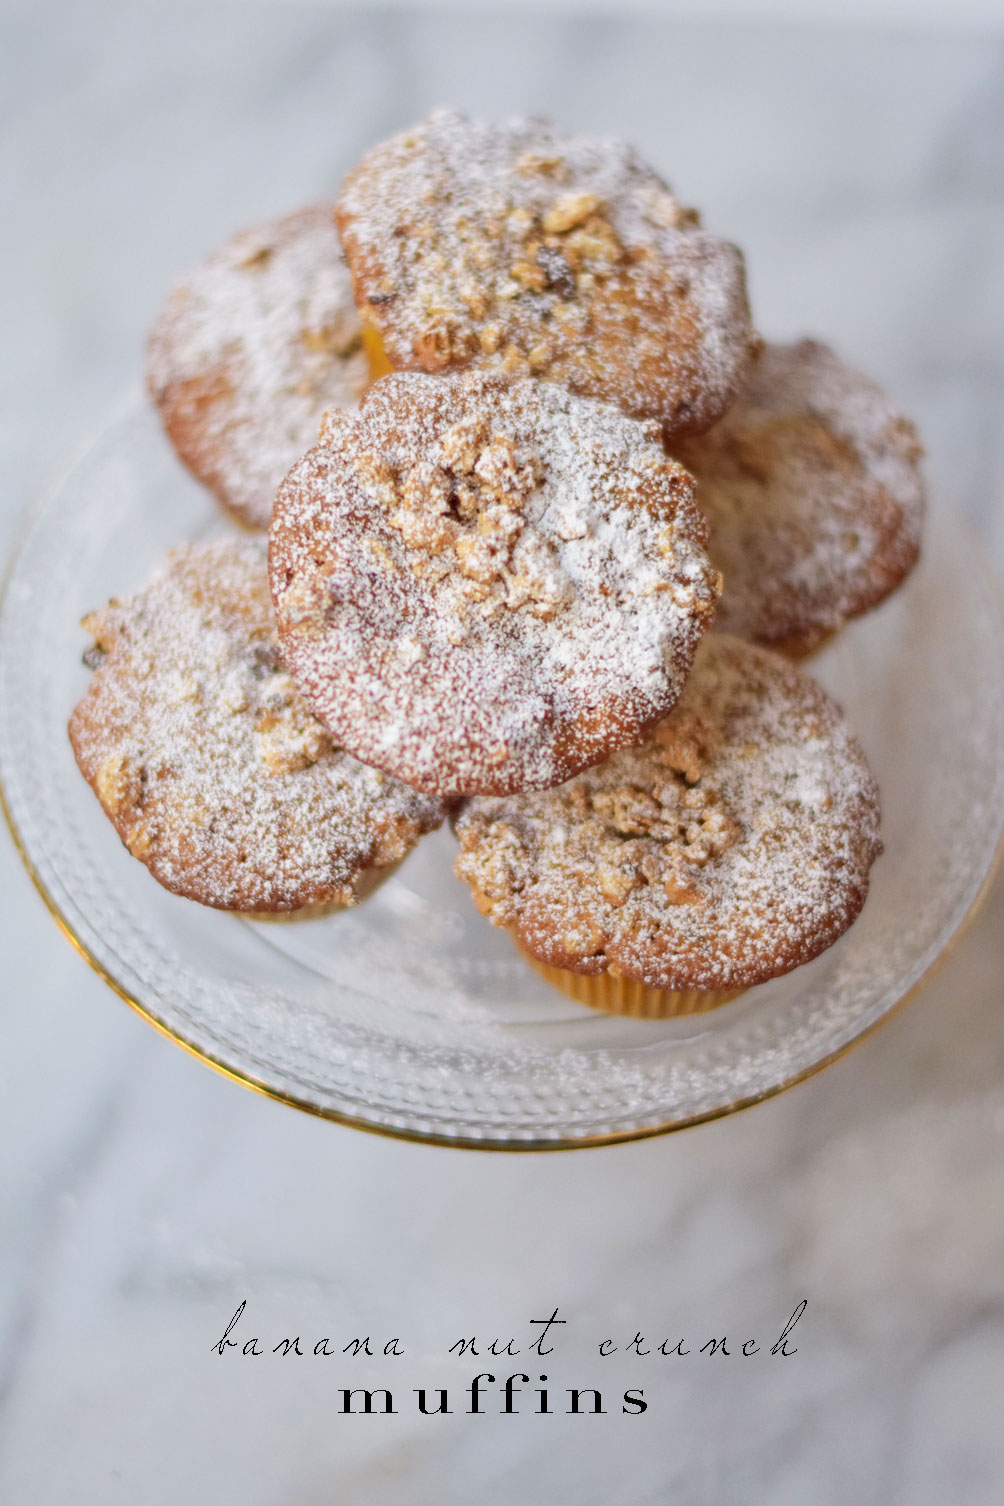 a healthy and delicious breakfast recipe for banana nut crunch muffins from Leslie Musser of one brass fox